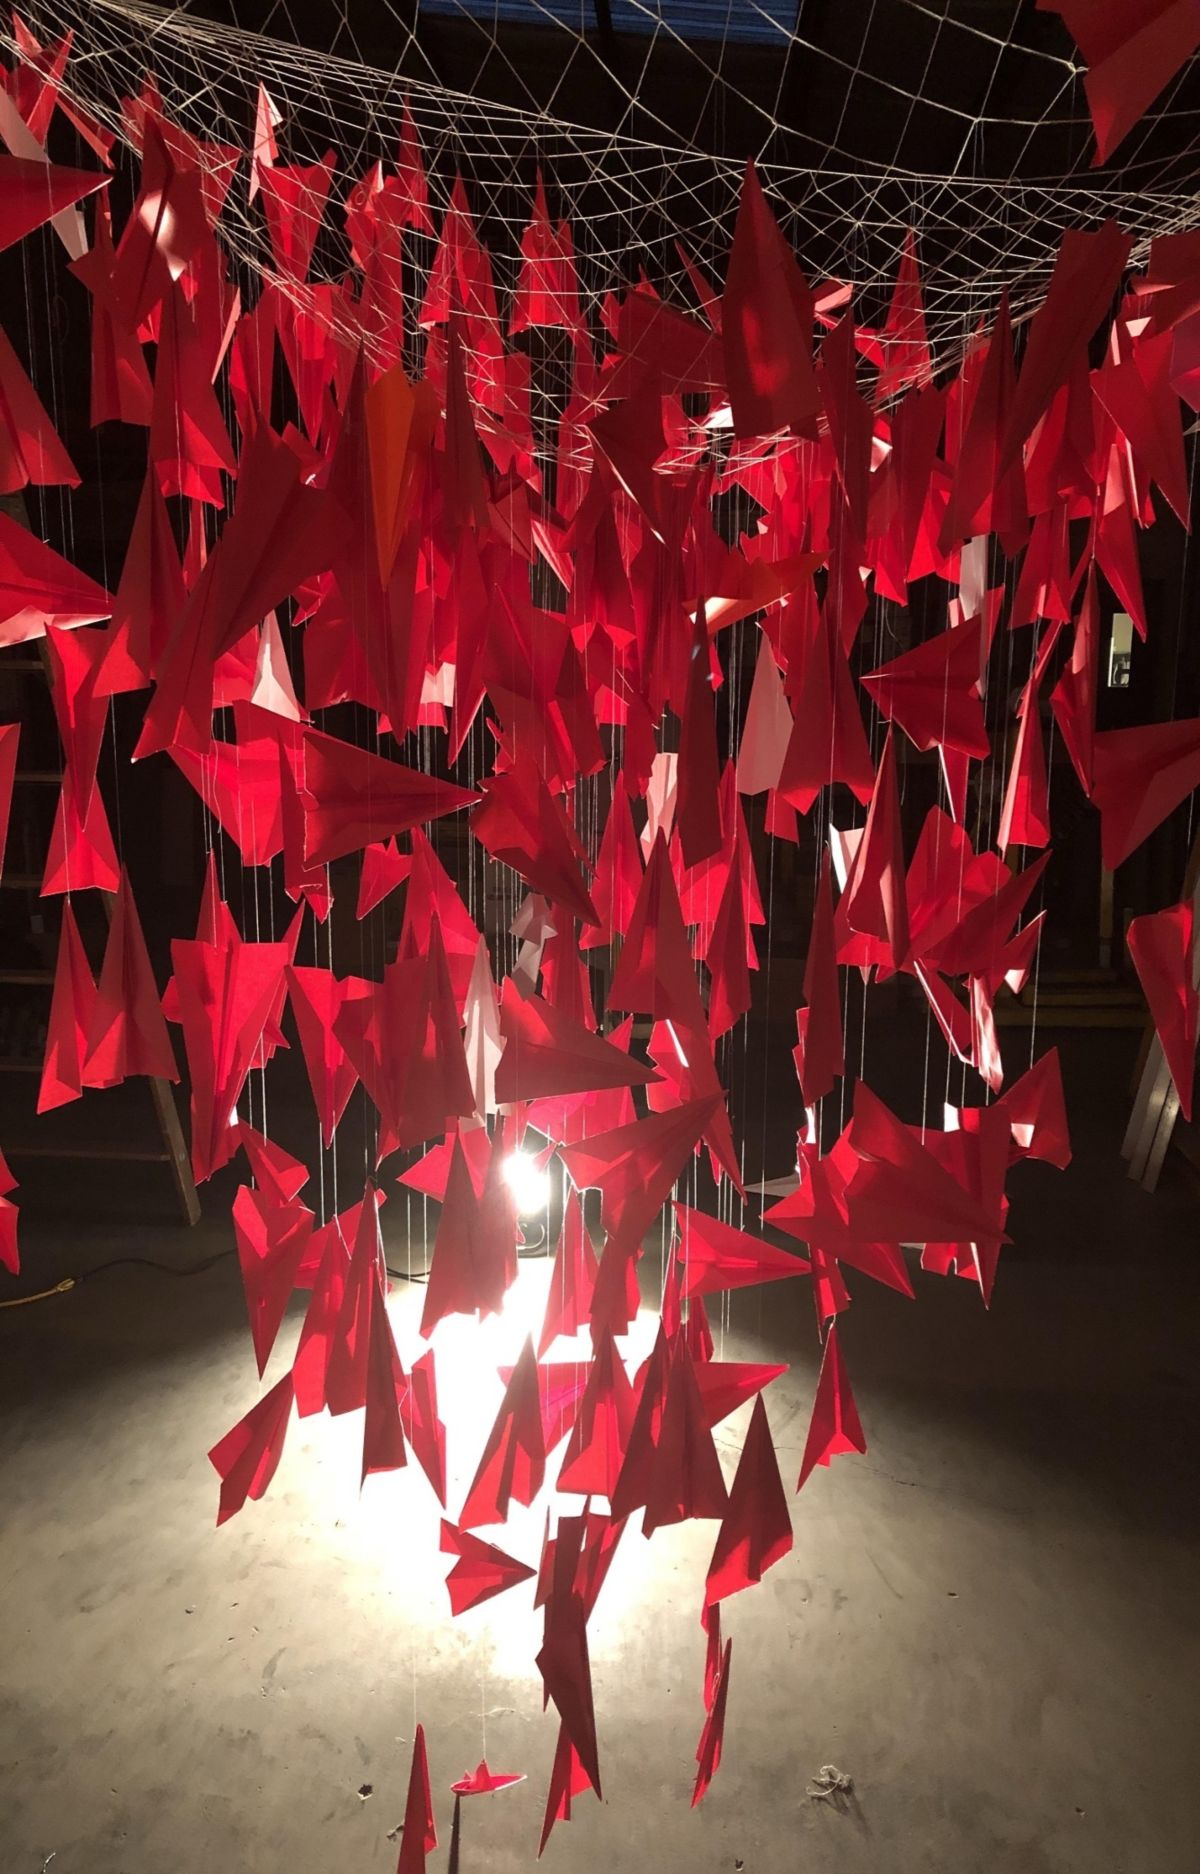 Installation of a large number of red paper airplanes suspended from a ceiling. 